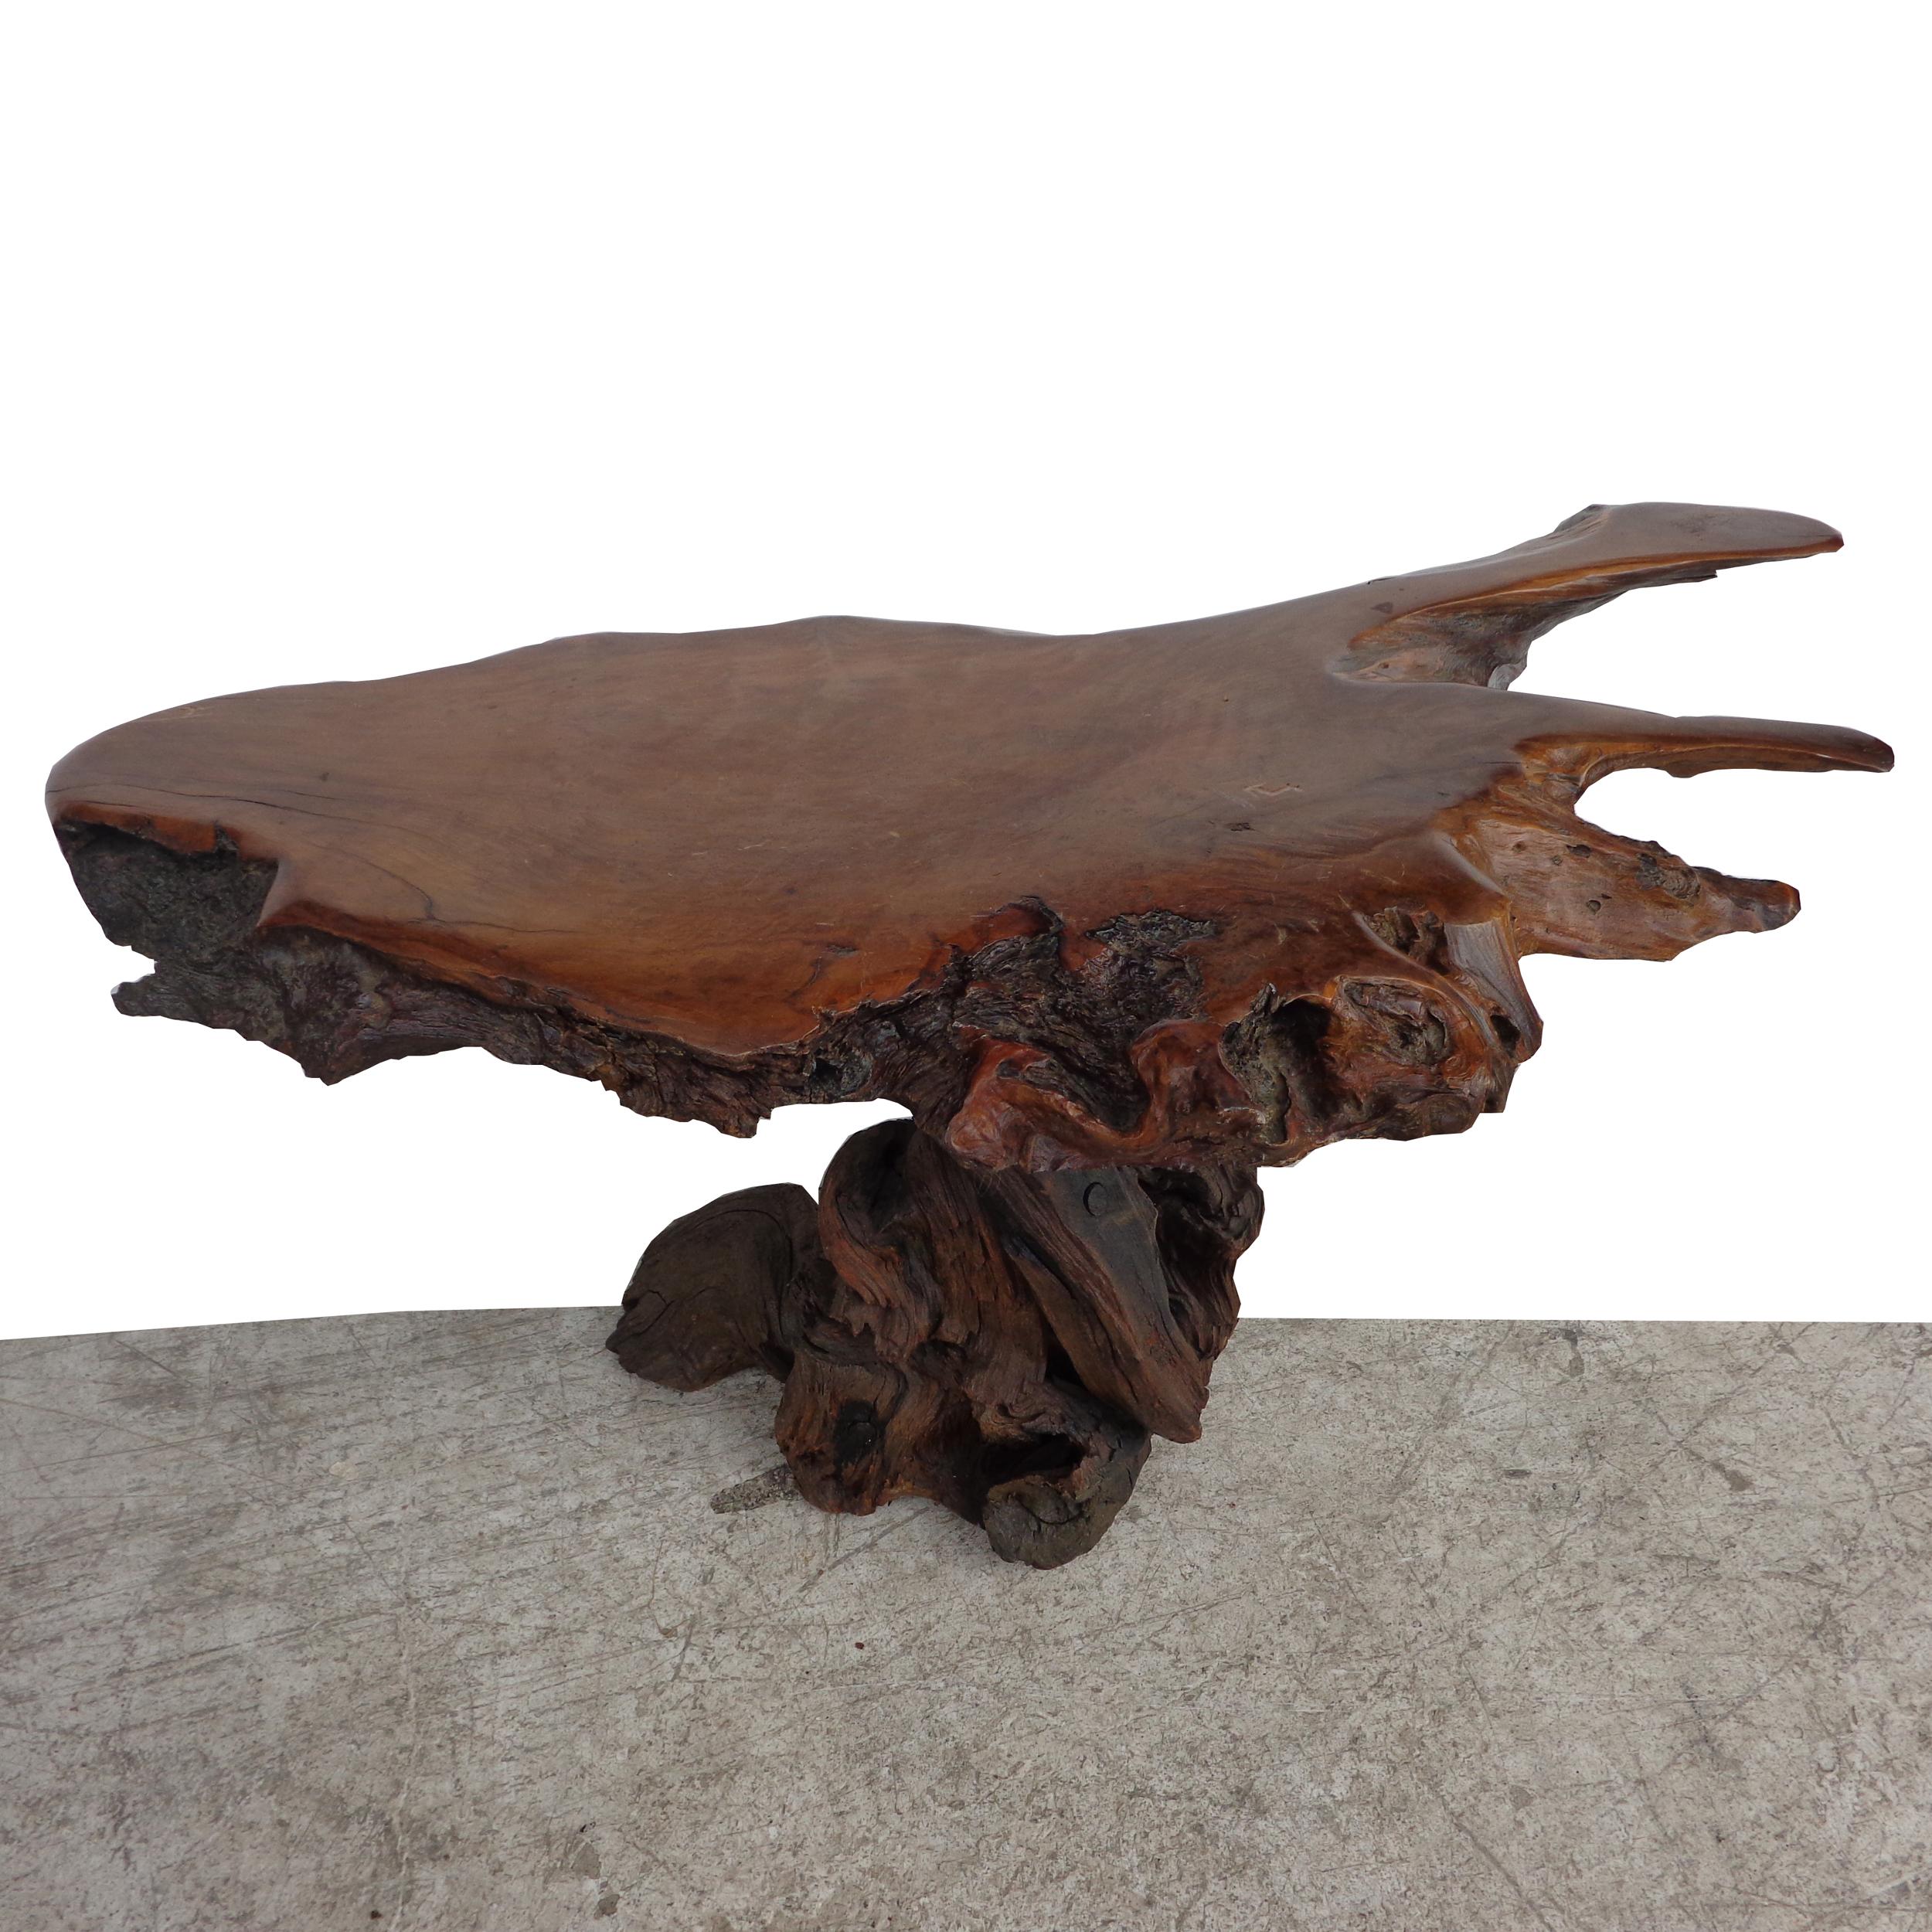 Live edge side table

Beautiful sculptural live edge coffee or side table.
Measures: 47